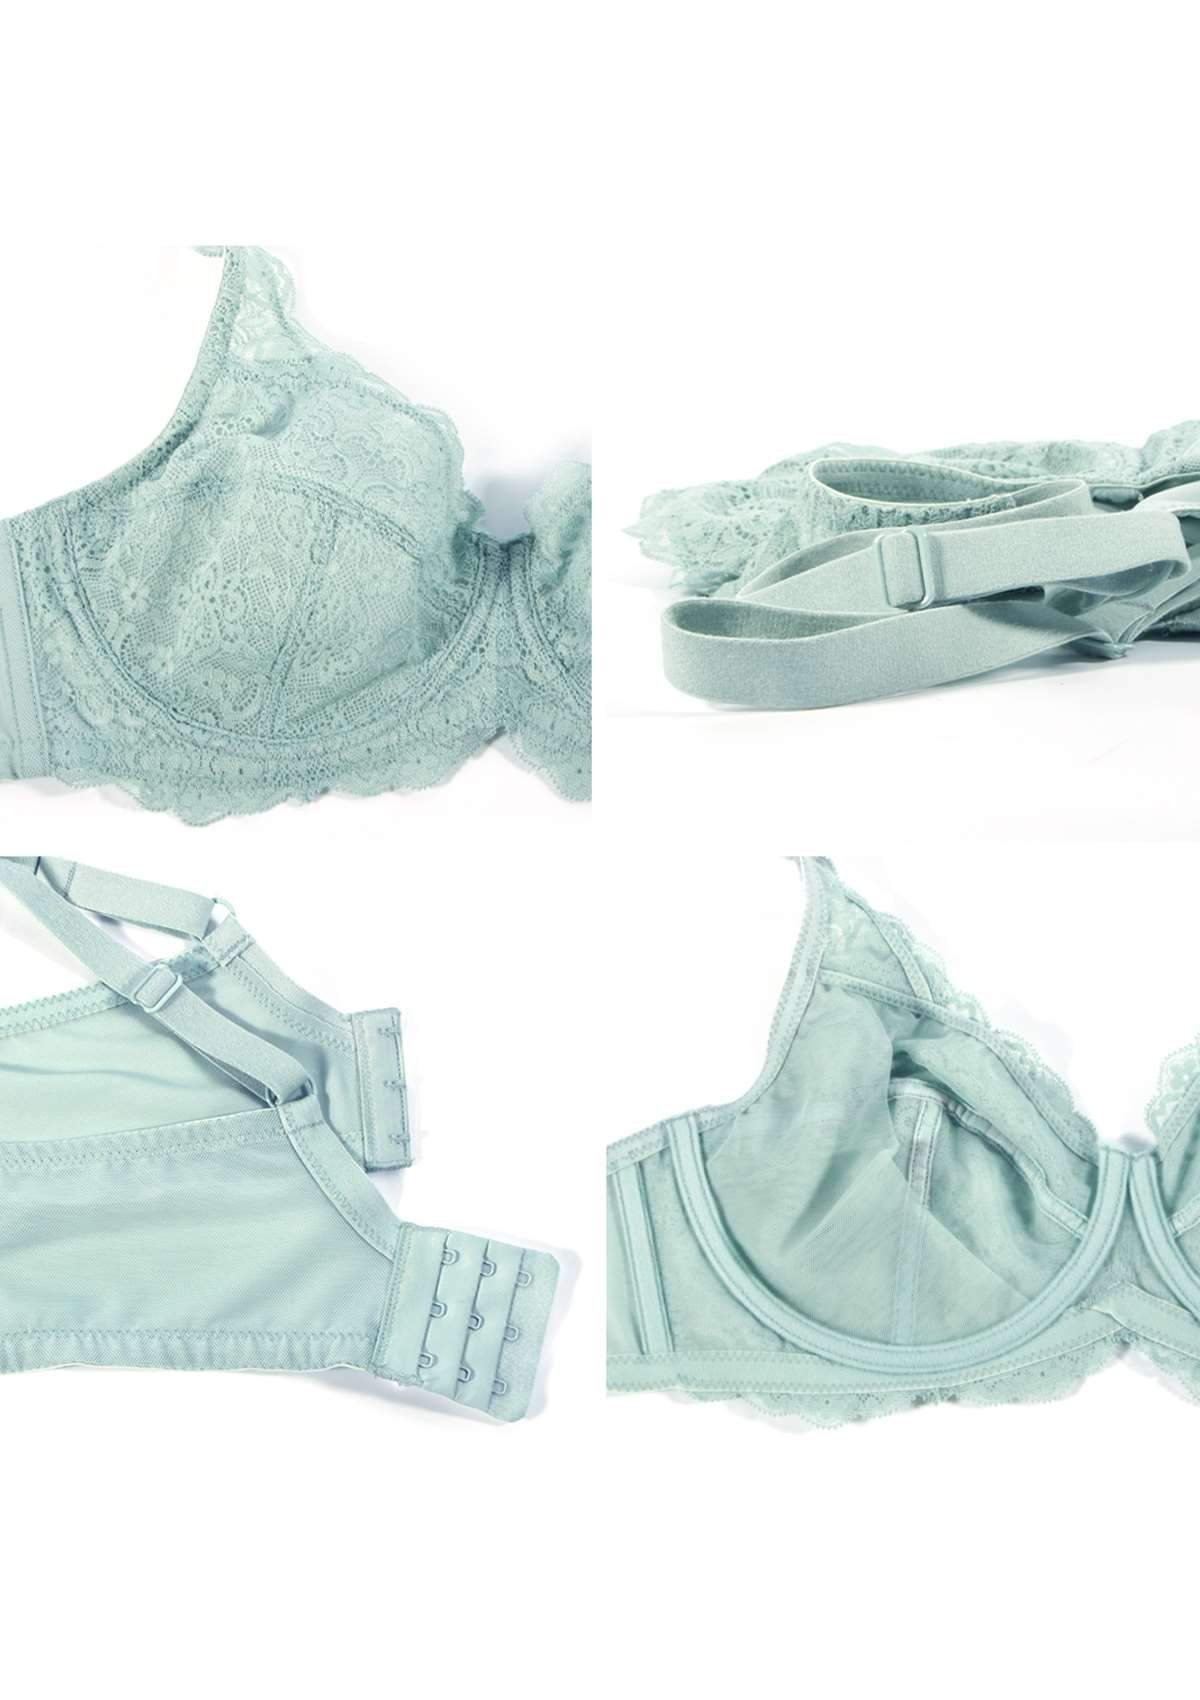 HSIA All-Over Floral Lace: Best Bra For Elderly With Sagging Breasts - Pewter Blue / 42 / DDD/F